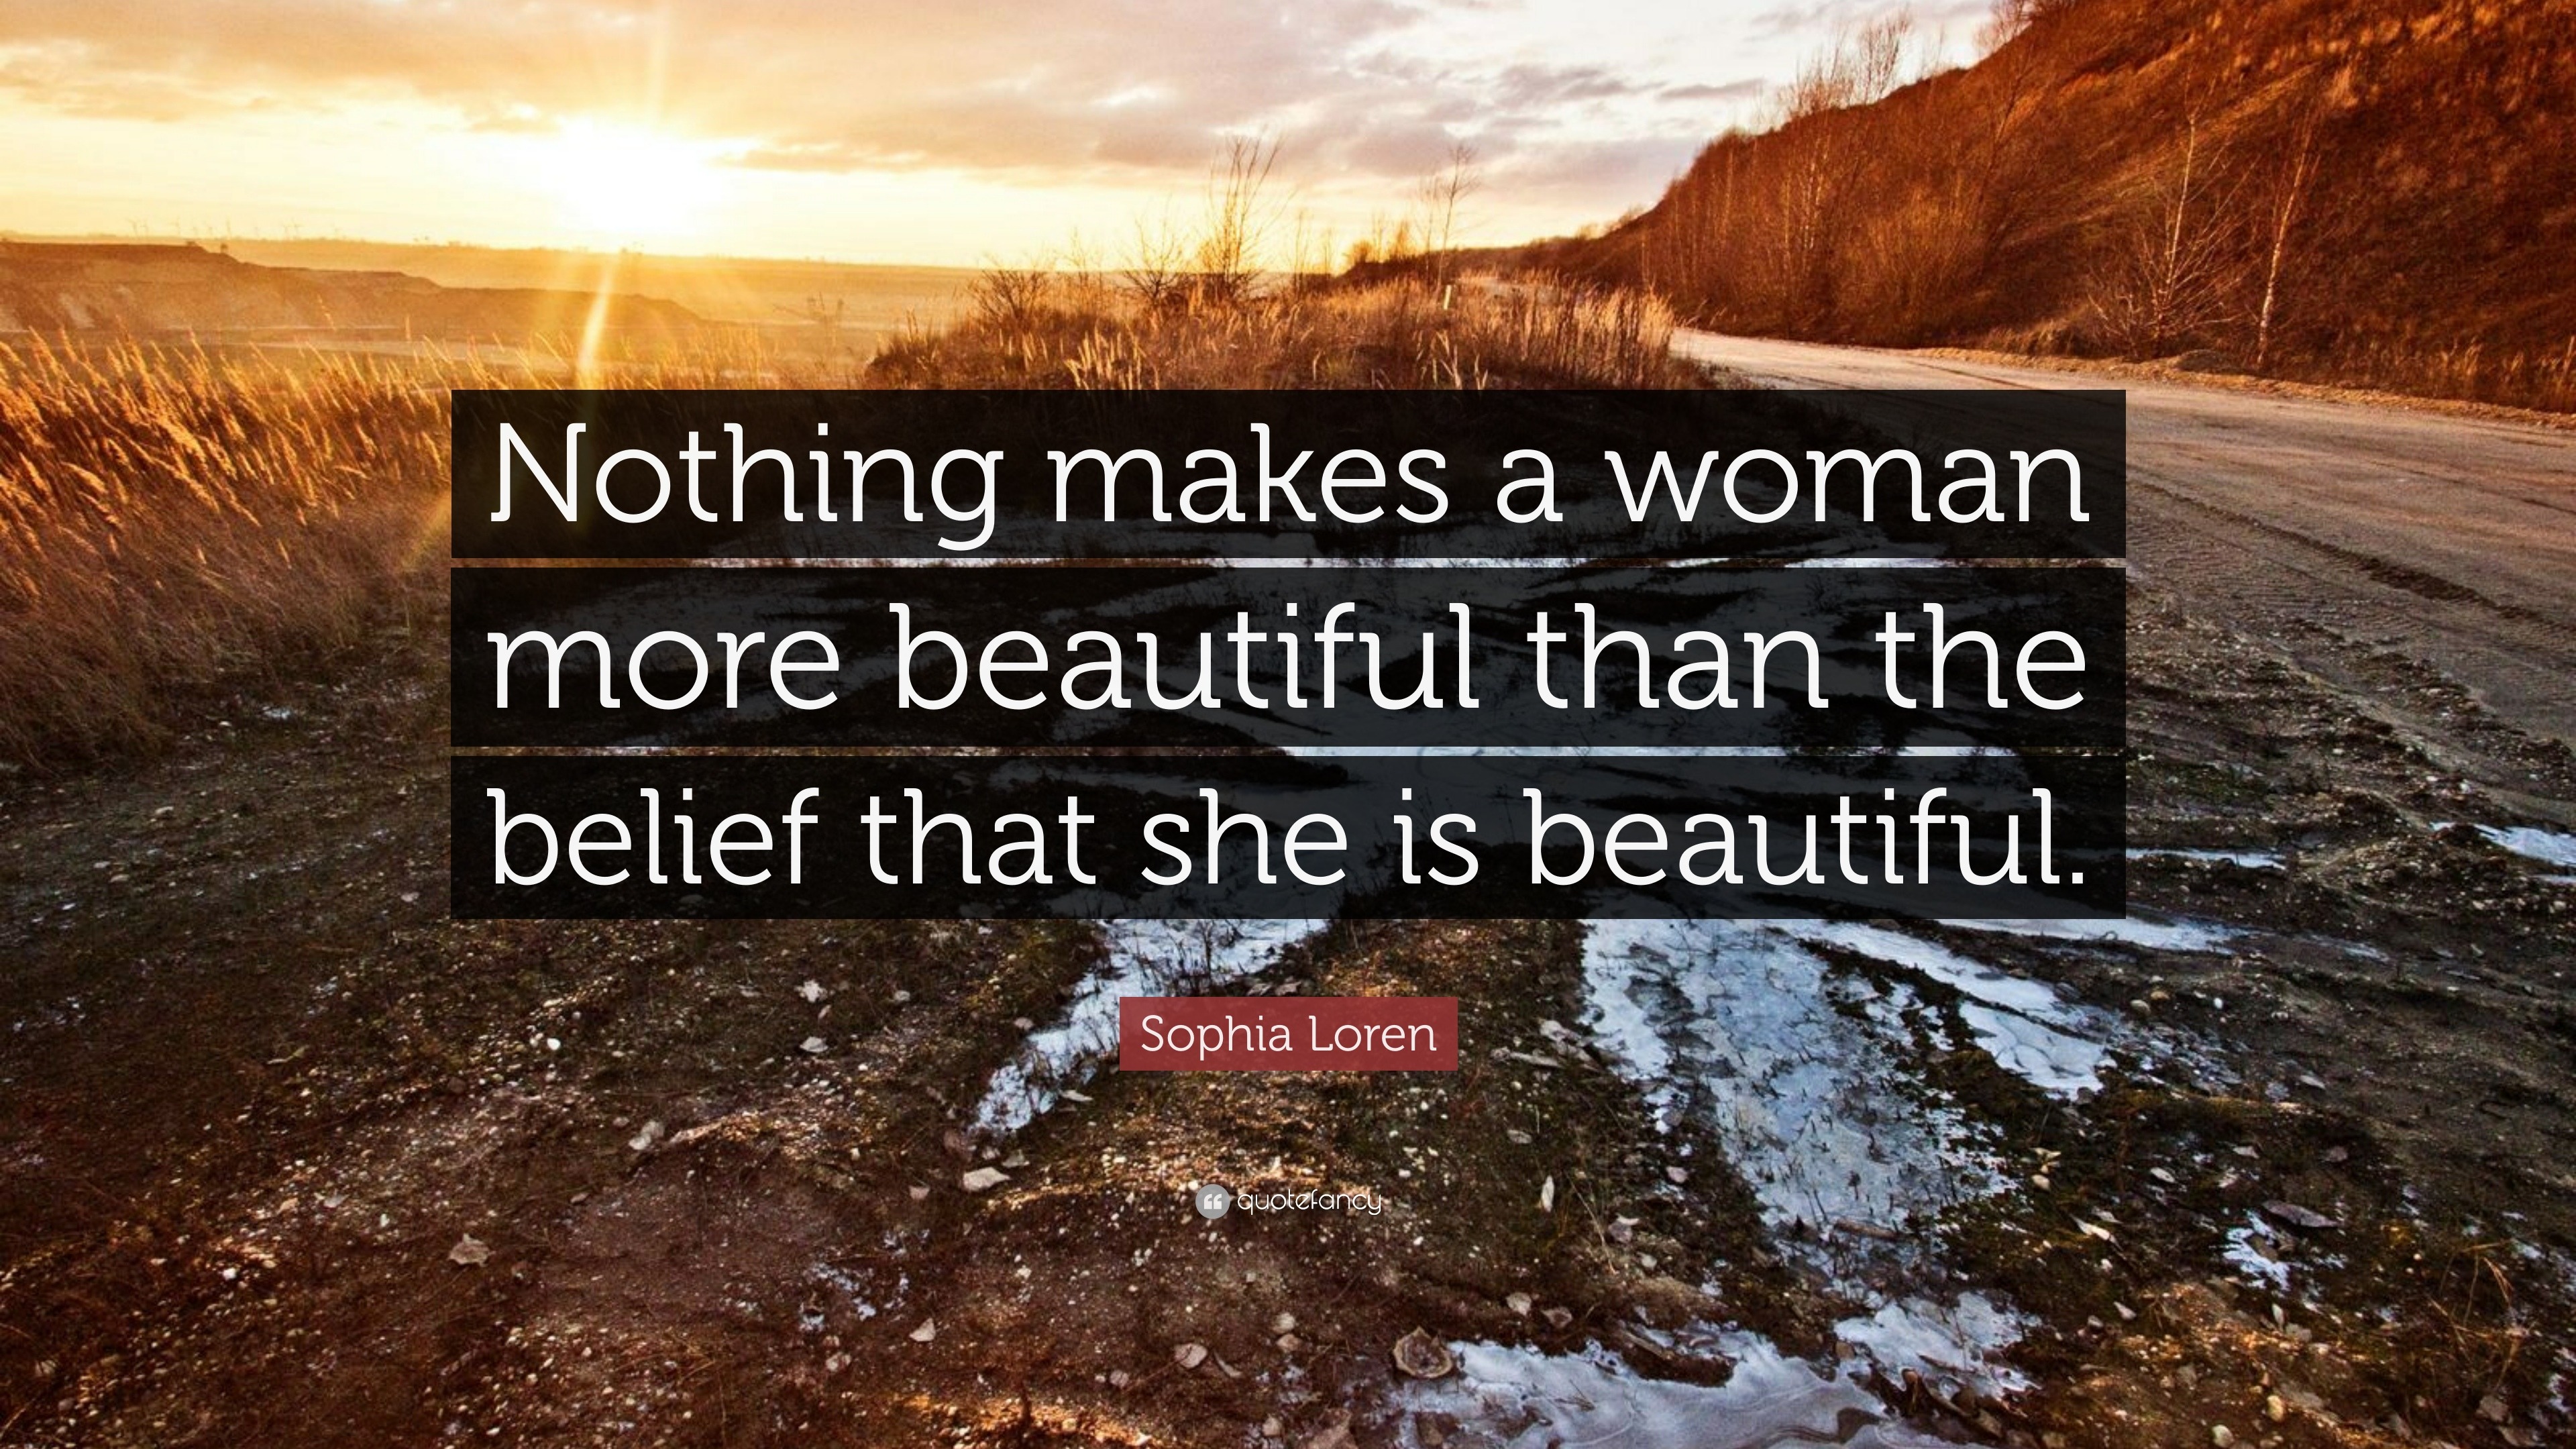 Sophia Loren Quote: “Nothing makes a woman more beautiful than the